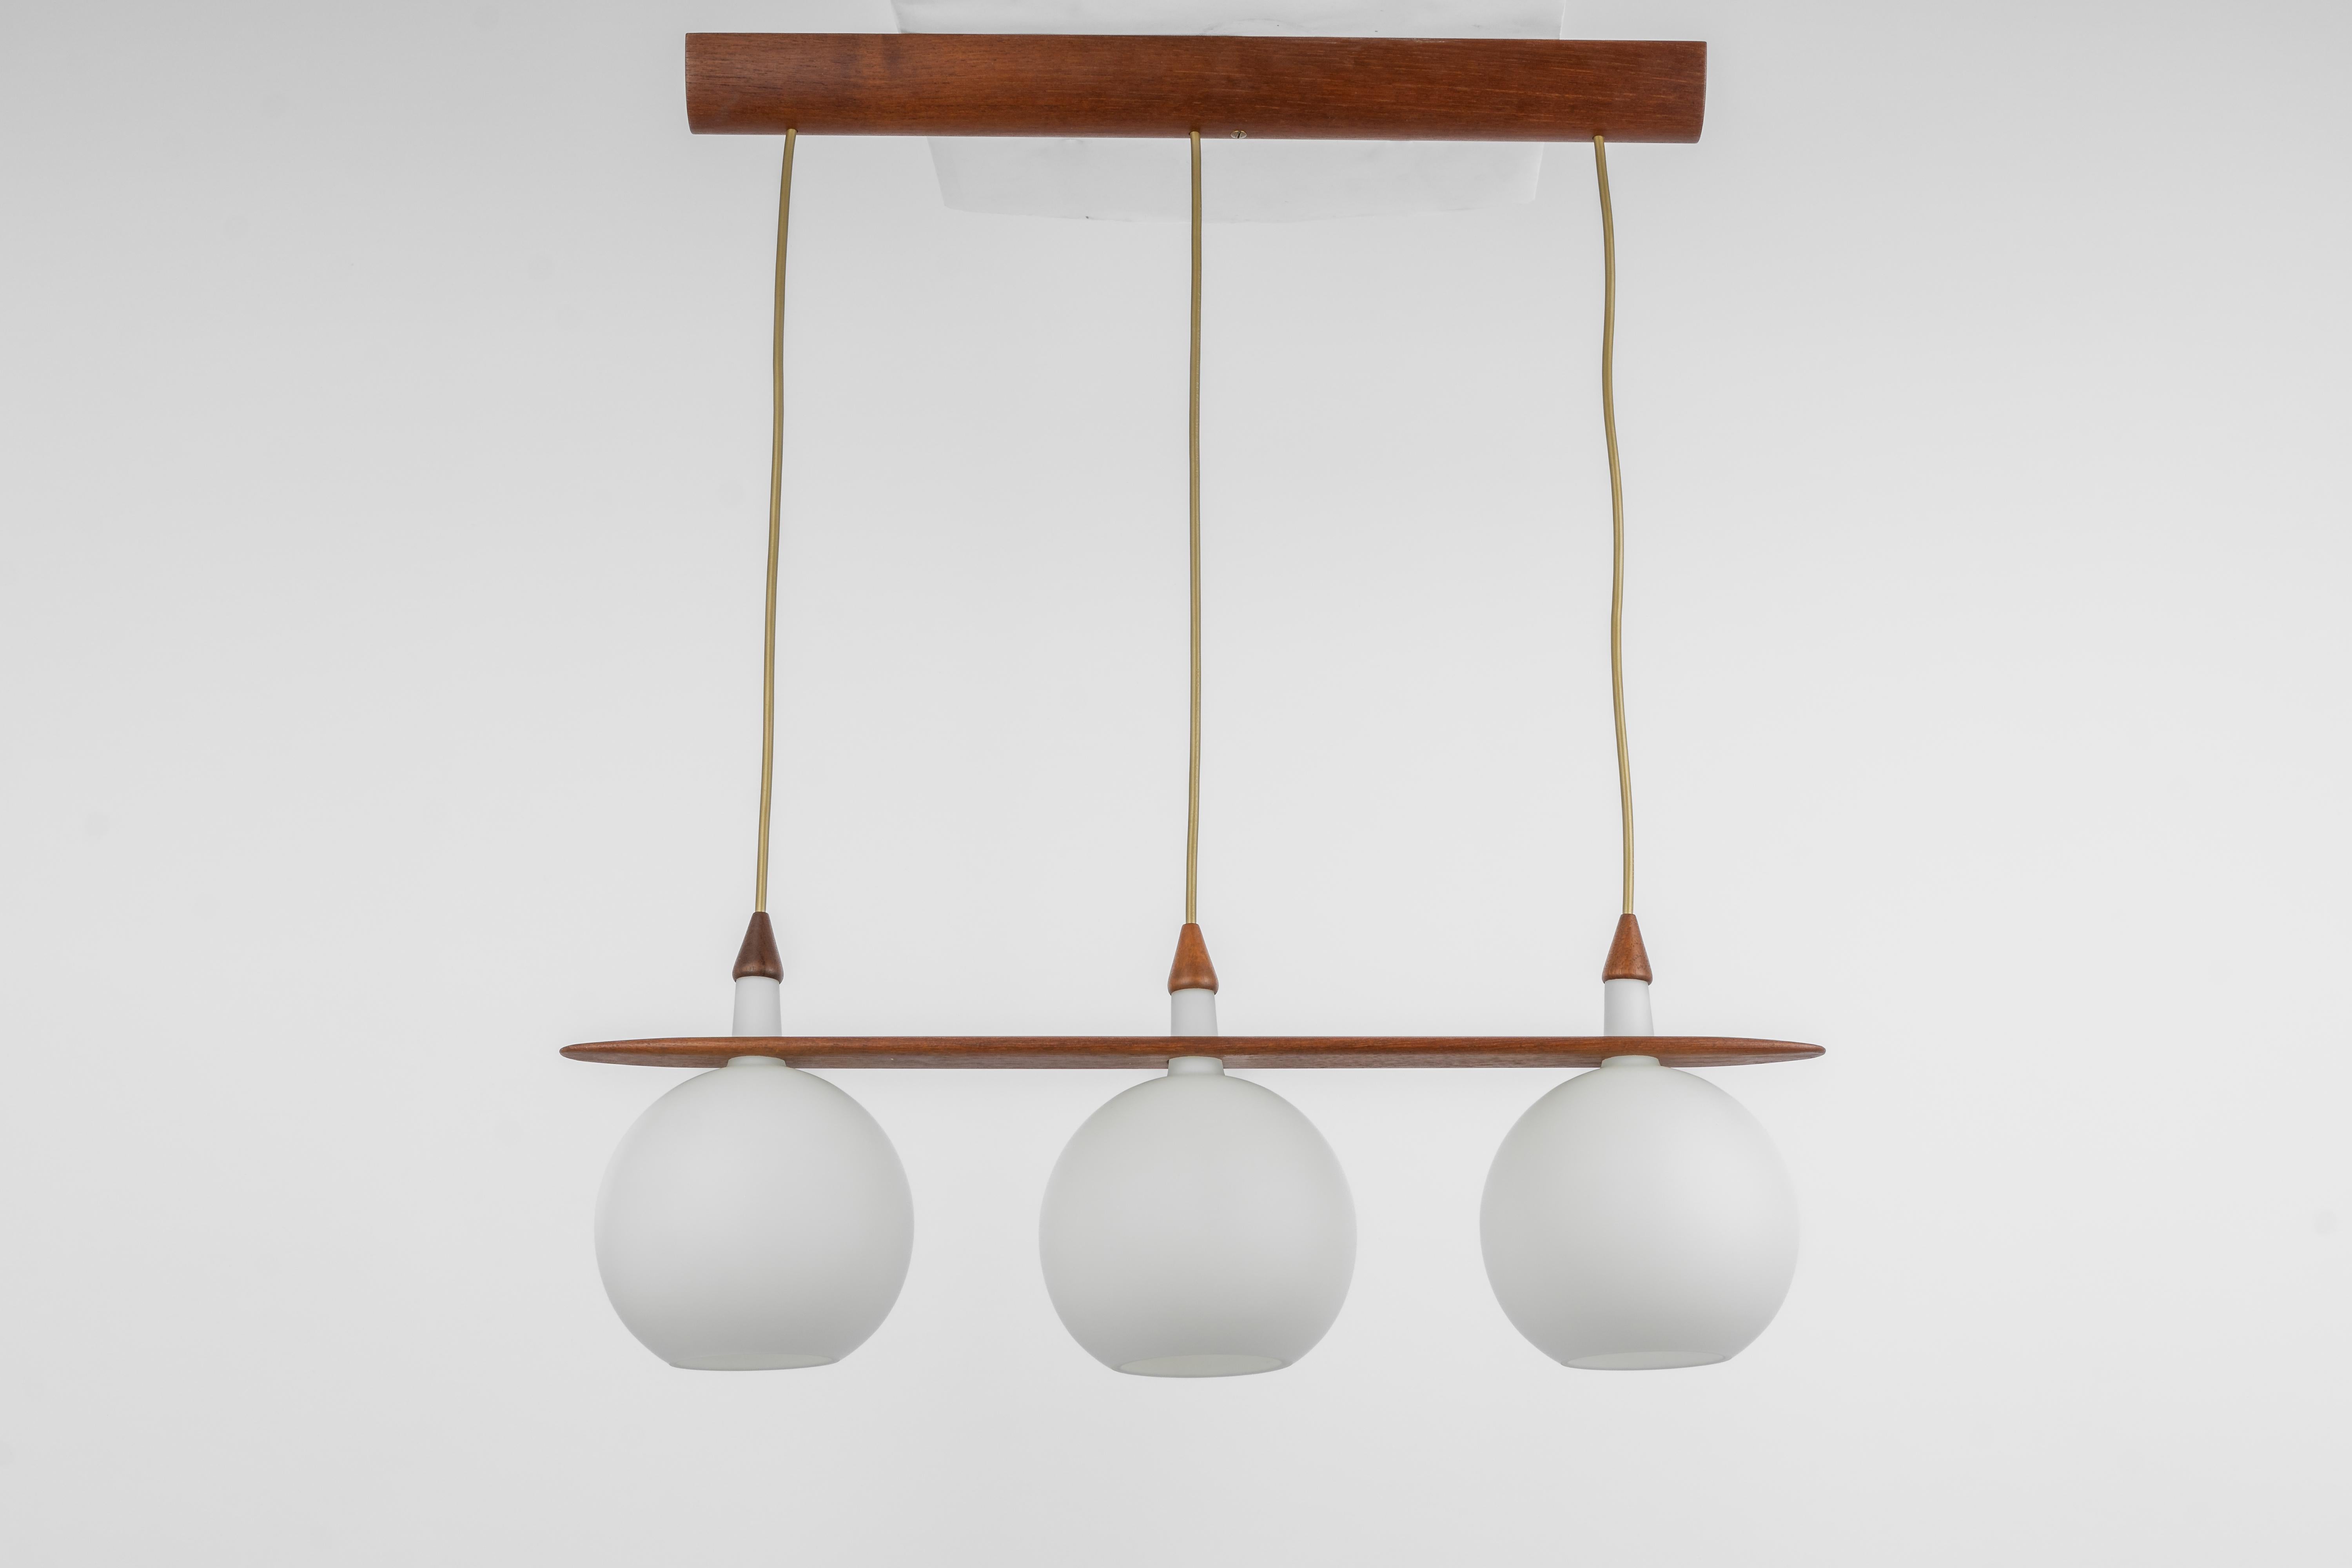 A wonderful midcentury teak chandelier. A unique, timeless, and elegant masterpiece of Danish Teak wood designed by Uno & Östen Kristiansson, Sweden, 1960s. The light sculpture impresses with the perfect materials of wood and opal glass. 

High